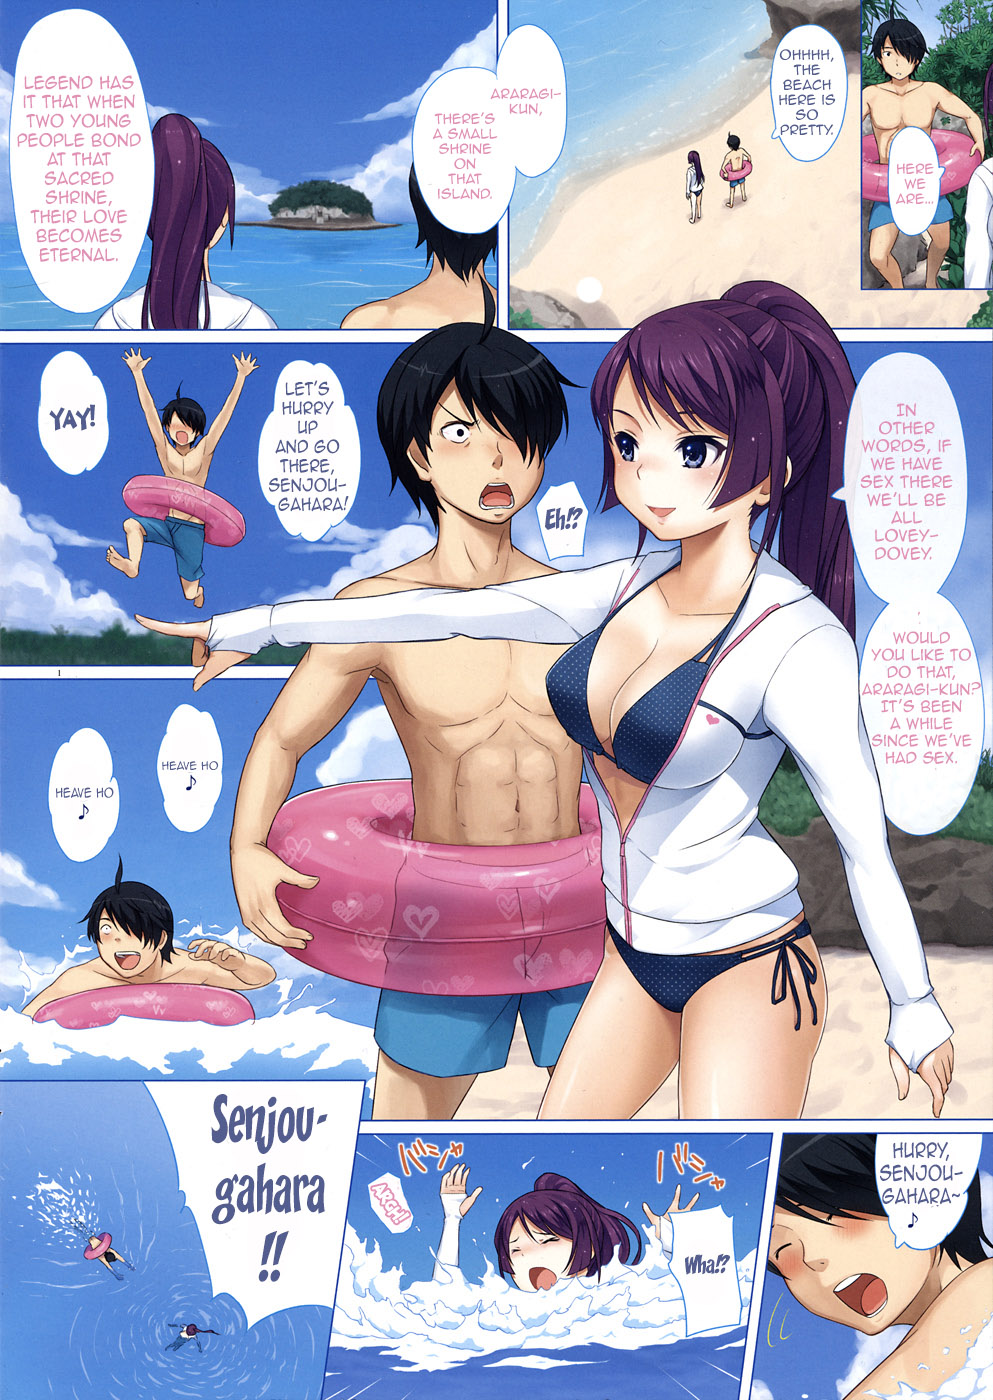 Sexy anime girlfriend gets turned on by hot public sex on the beach - hentai manga photo